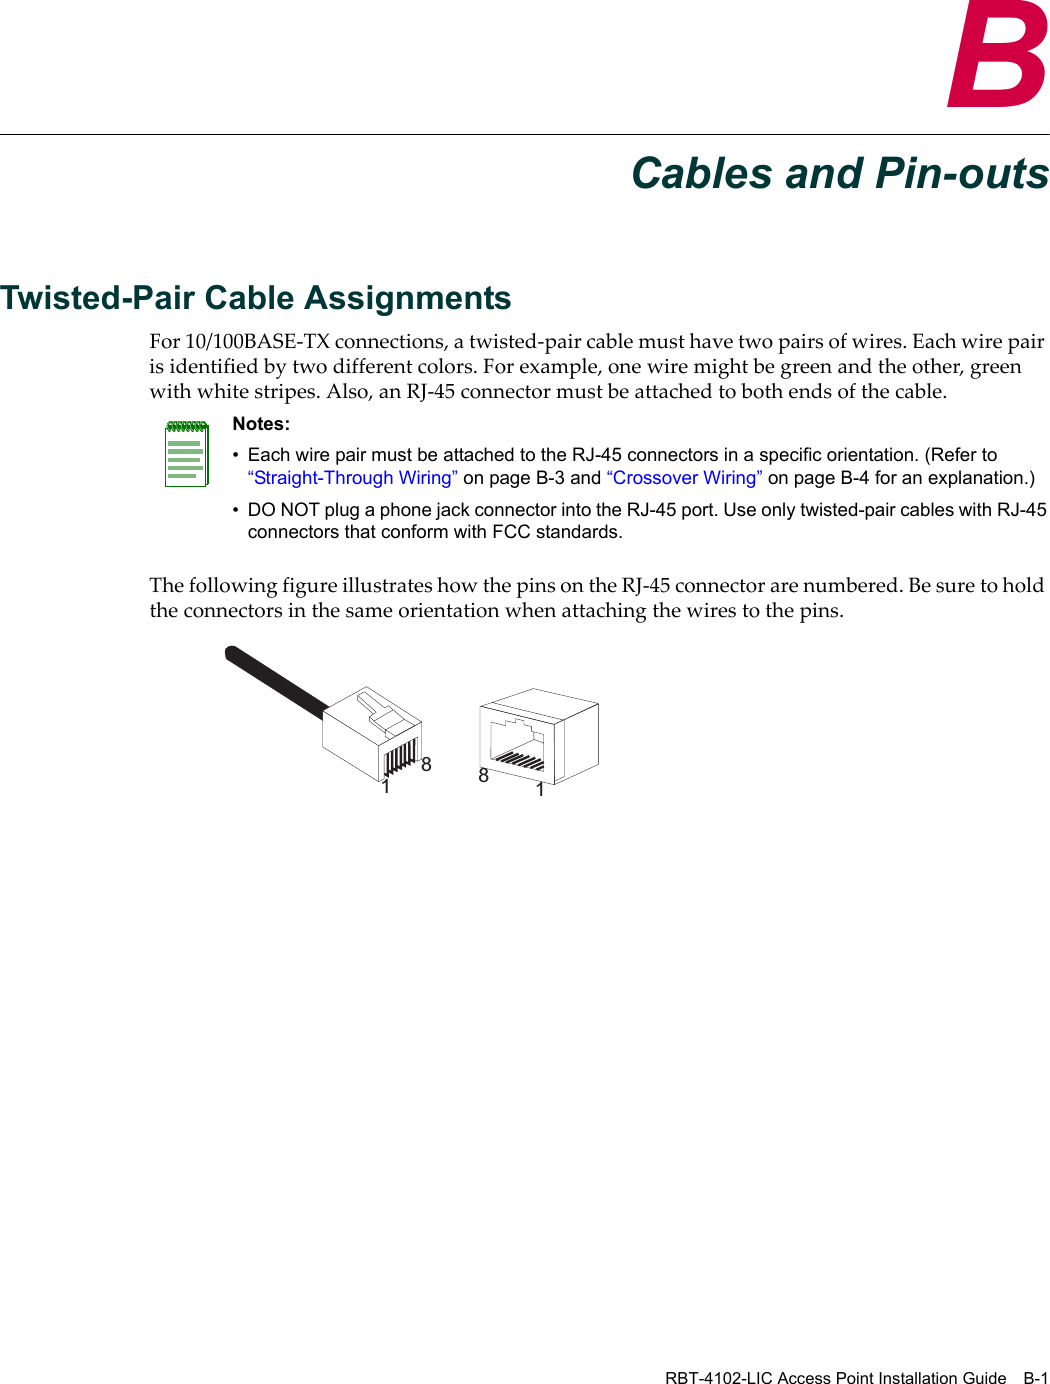 RBT-4102-LIC Access Point Installation Guide B-1BCables and Pin-outsTwisted-Pair Cable Assignments For10/100BASE‐TXconnections,atwisted‐paircablemusthavetwopairsofwires.Eachwirepairisidentifiedbytwodifferentcolors.Forexample,onewiremightbegreenandtheother,greenwithwhitestripes.Also,anRJ‐45connectormustbeattachedtobothendsofthecable.ThefollowingfigureillustrateshowthepinsontheRJ‐45connectorarenumbered.Besuretoholdtheconnectorsinthesameorientationwhenattachingthewirestothepins.Notes: • Each wire pair must be attached to the RJ-45 connectors in a specific orientation. (Refer to “Straight-Through Wiring” on page B-3 and “Crossover Wiring” on page B-4 for an explanation.)• DO NOT plug a phone jack connector into the RJ-45 port. Use only twisted-pair cables with RJ-45 connectors that conform with FCC standards.1881